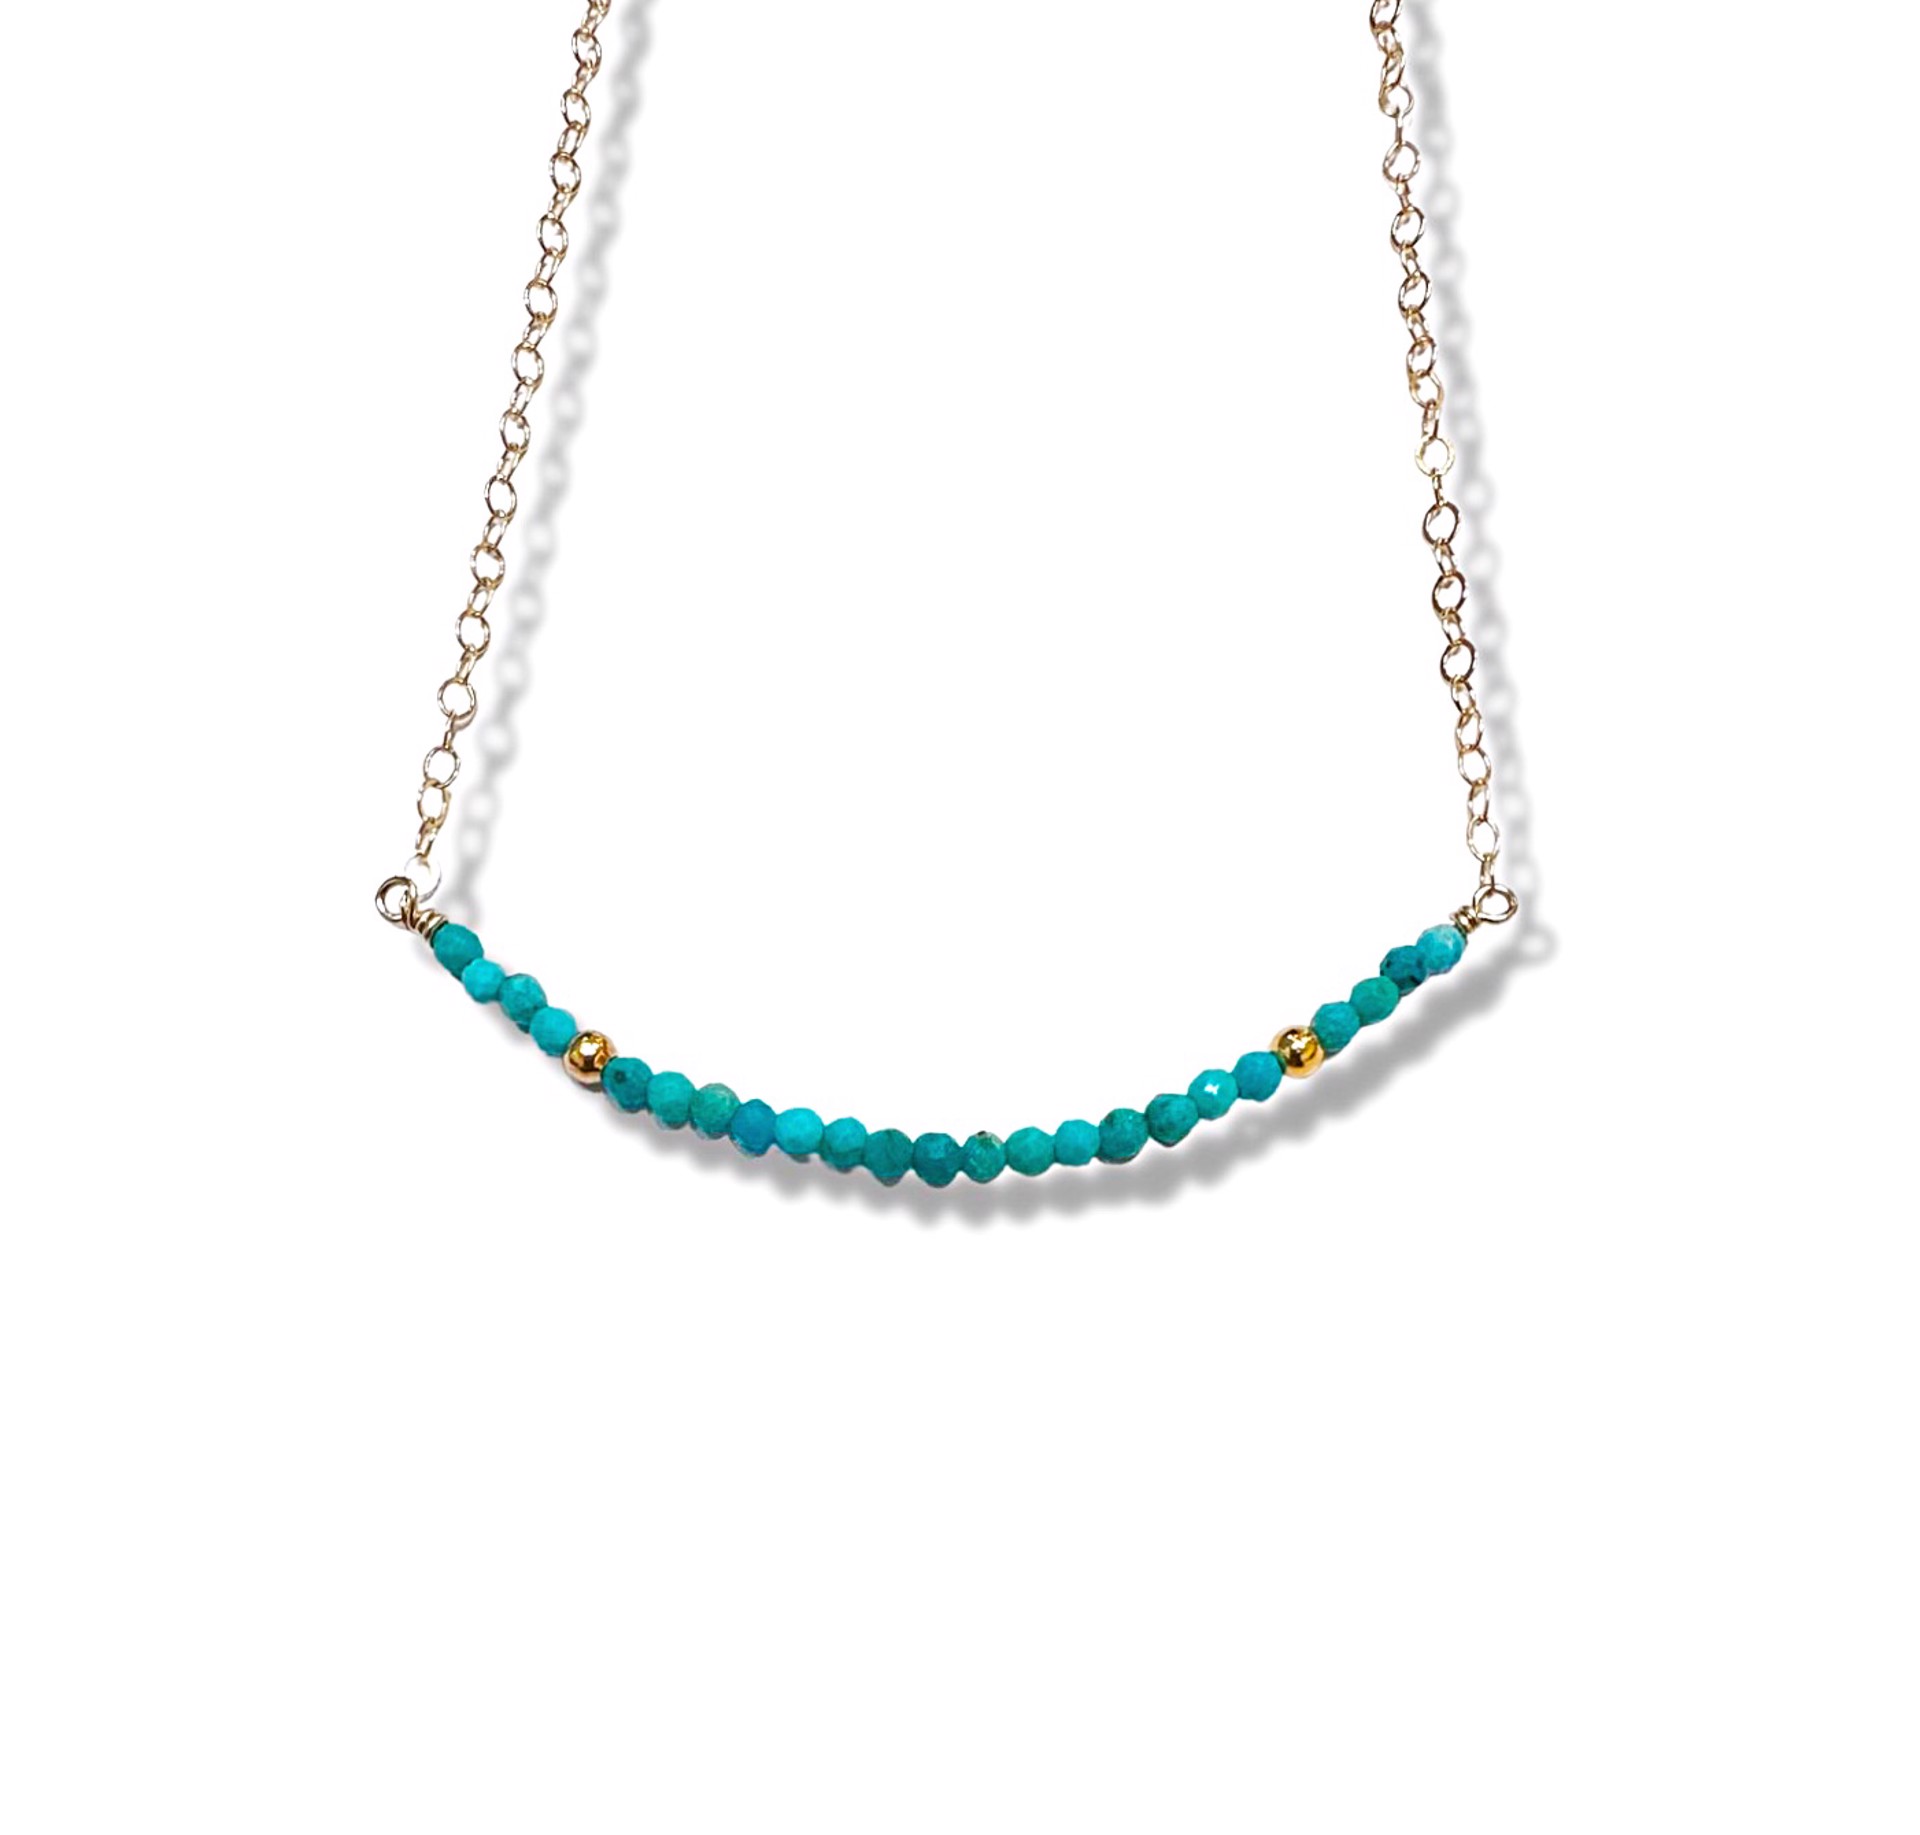 Necklace - Sleeping Beauty Turquoise with 14K Gold by Julia Balestracci